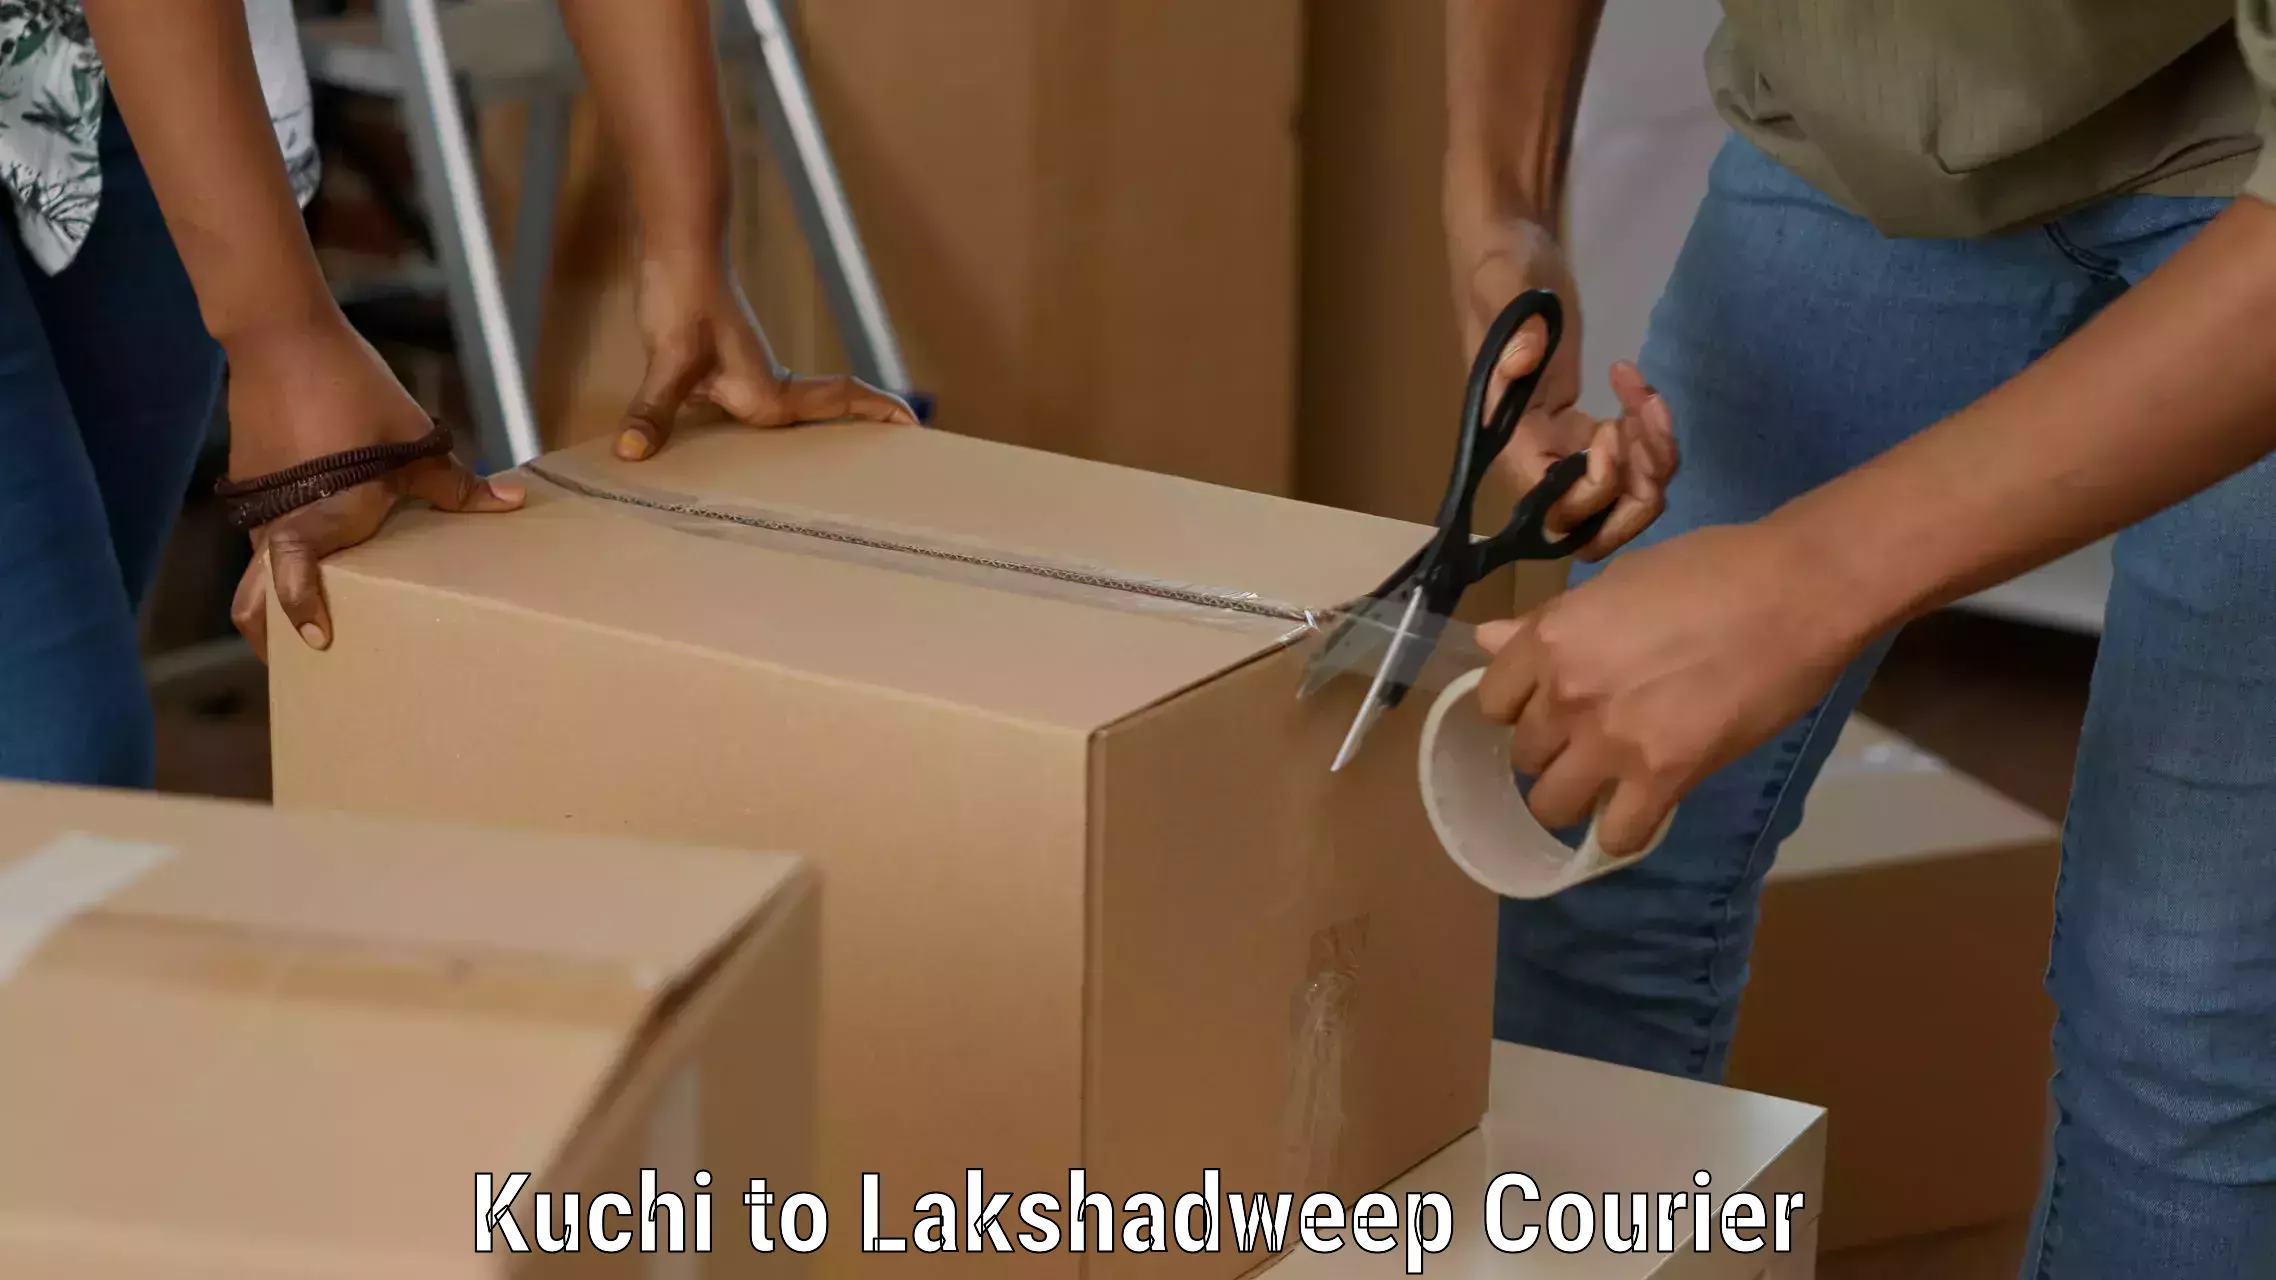 Rural area delivery Kuchi to Lakshadweep